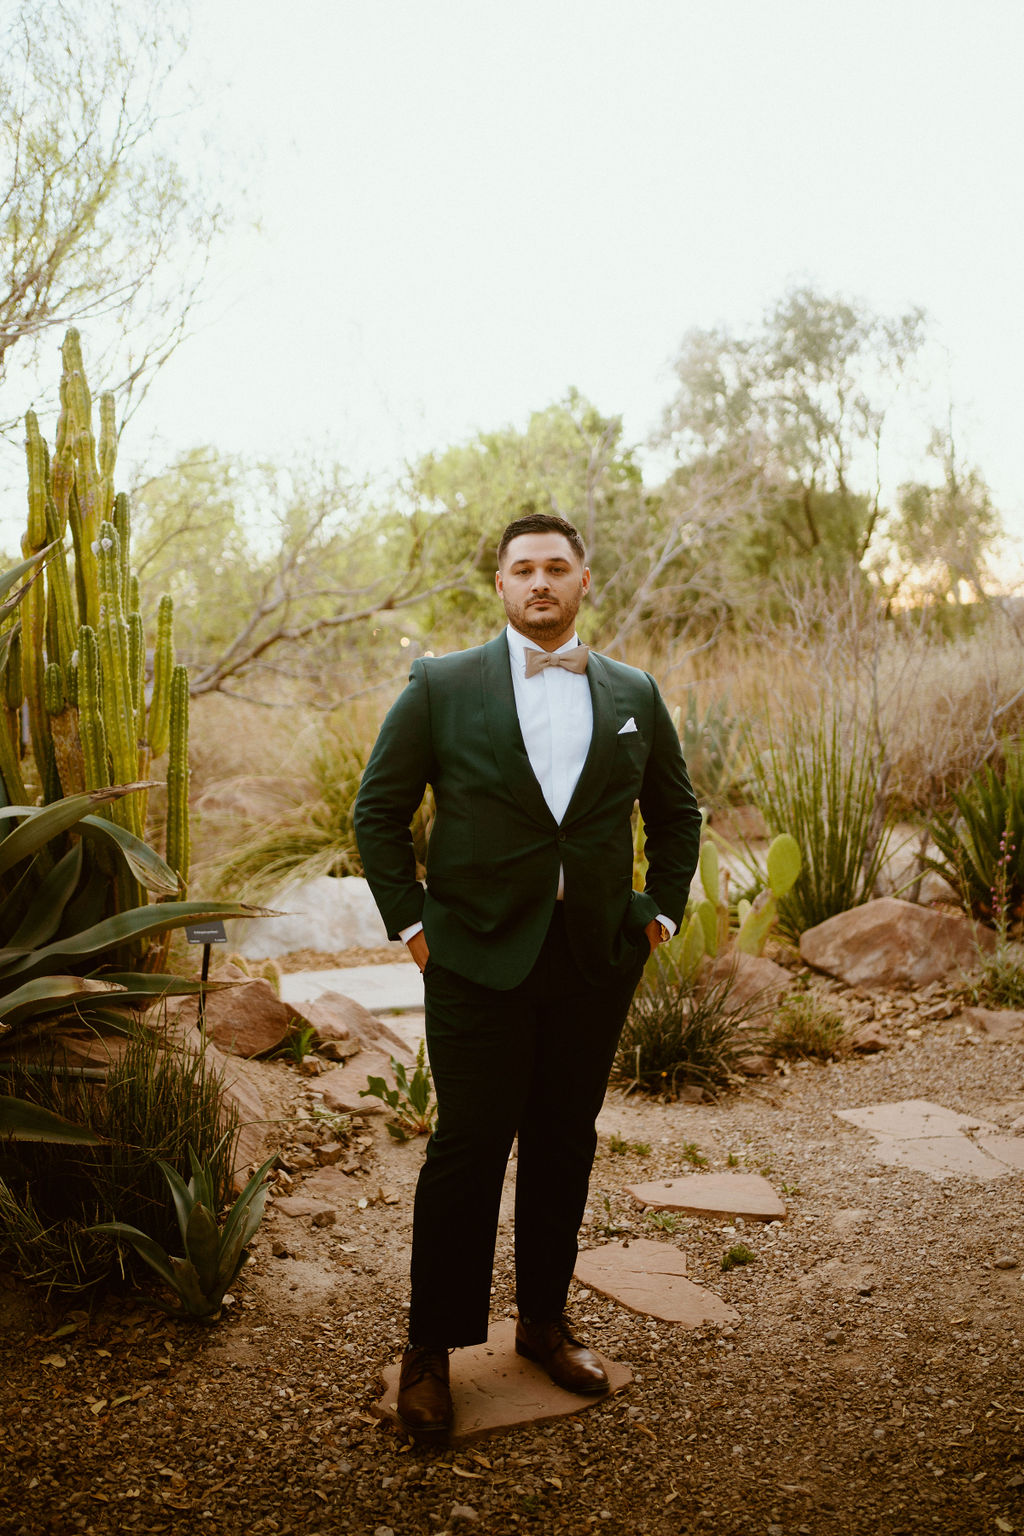 Groom in suit and bow-tie for Springs Preserve Greenery Elopement